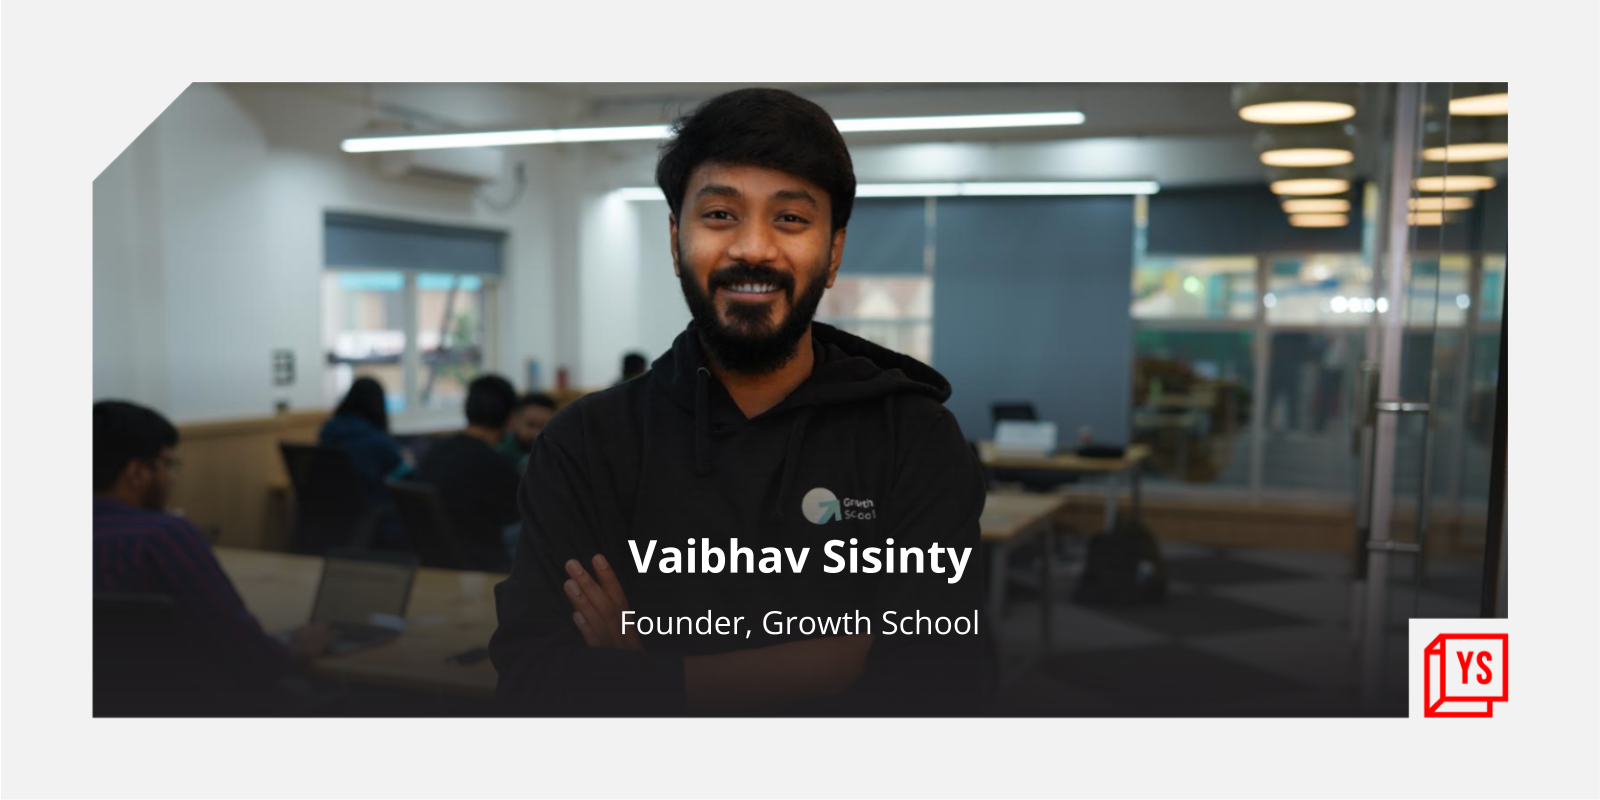 [Funding alert] Growth School raises $5M in seed round led by Sequoia Capital India, Owl Ventures